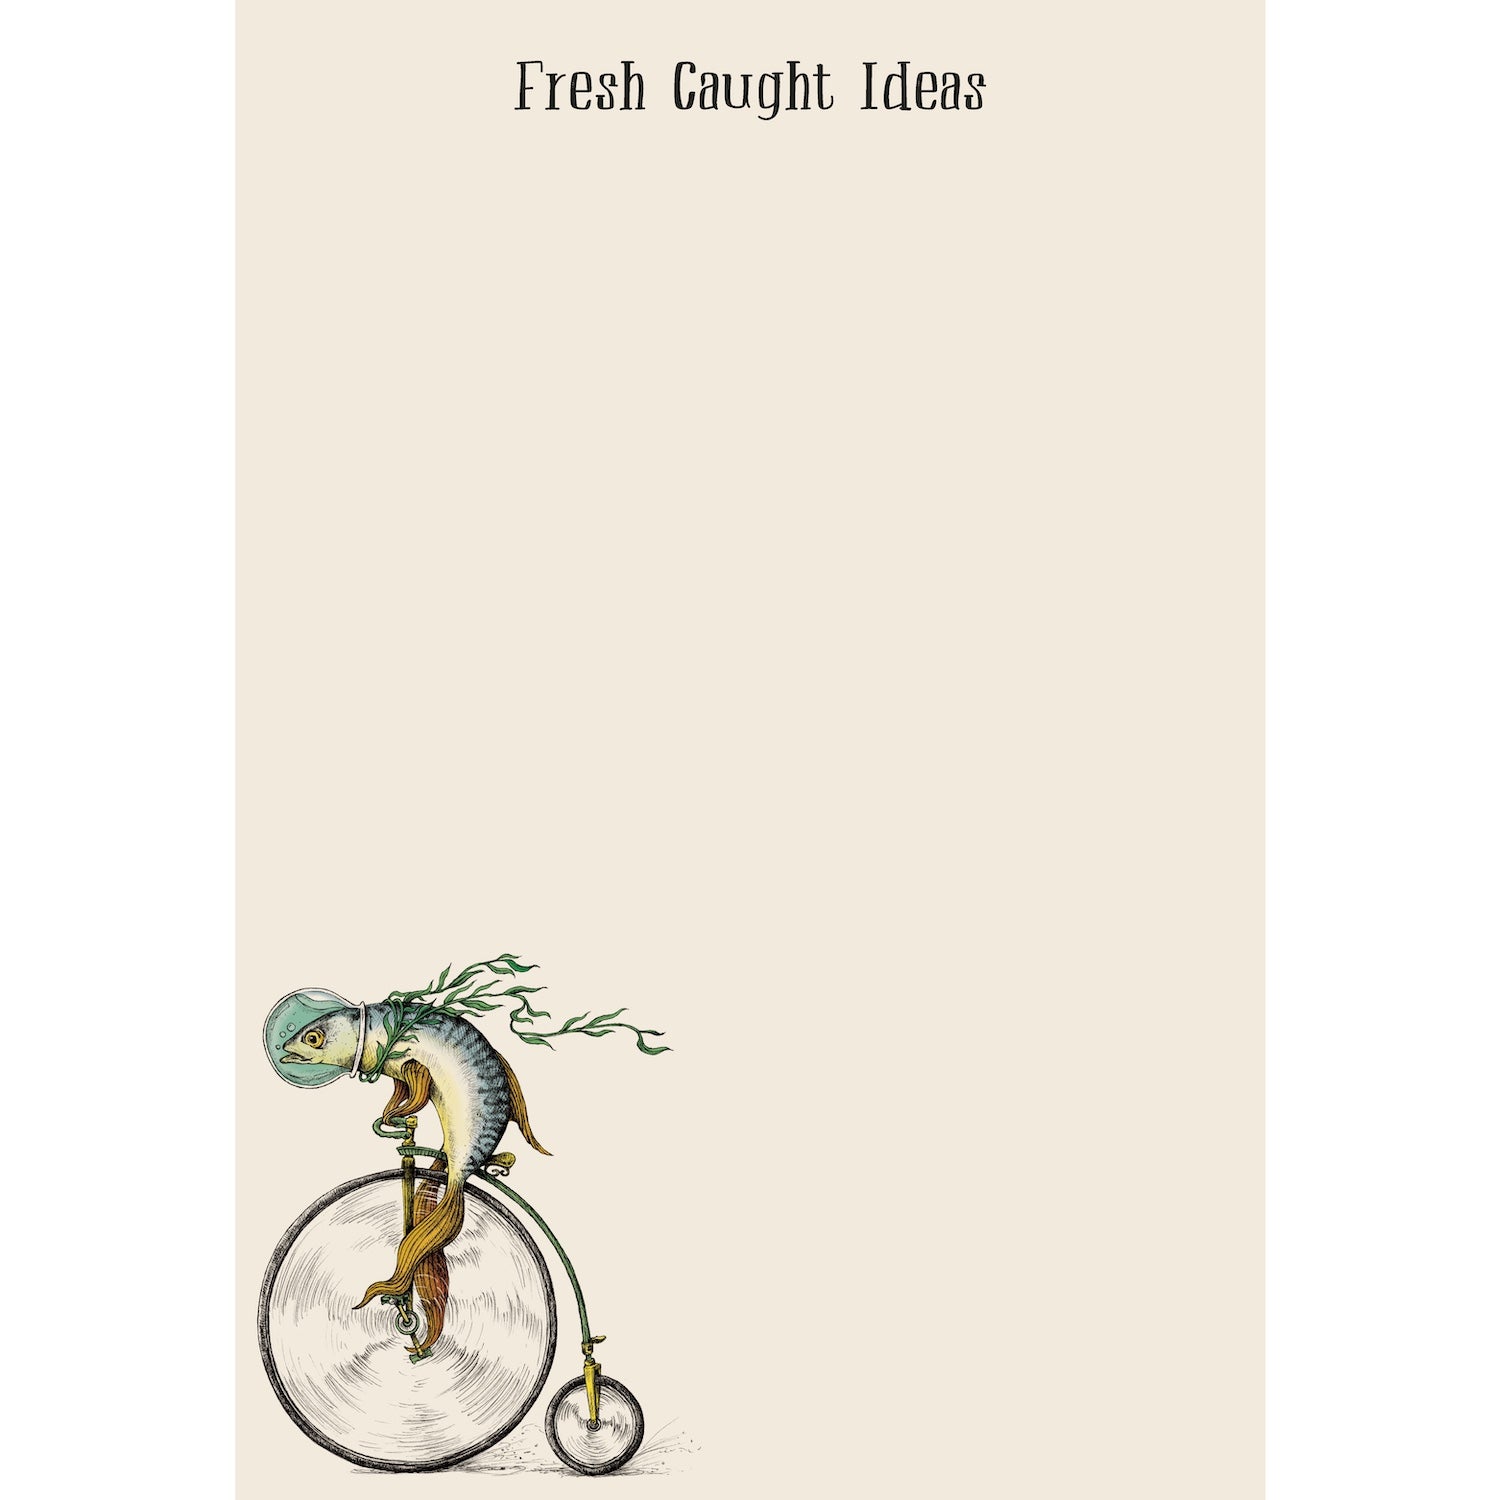 A cream notepad labeled &quot;Fresh Caught Ideas&quot; across the top, featuring a whimsical illustration of a fish riding a penny-farthing bicycle with a fish bowl full of water over its head.